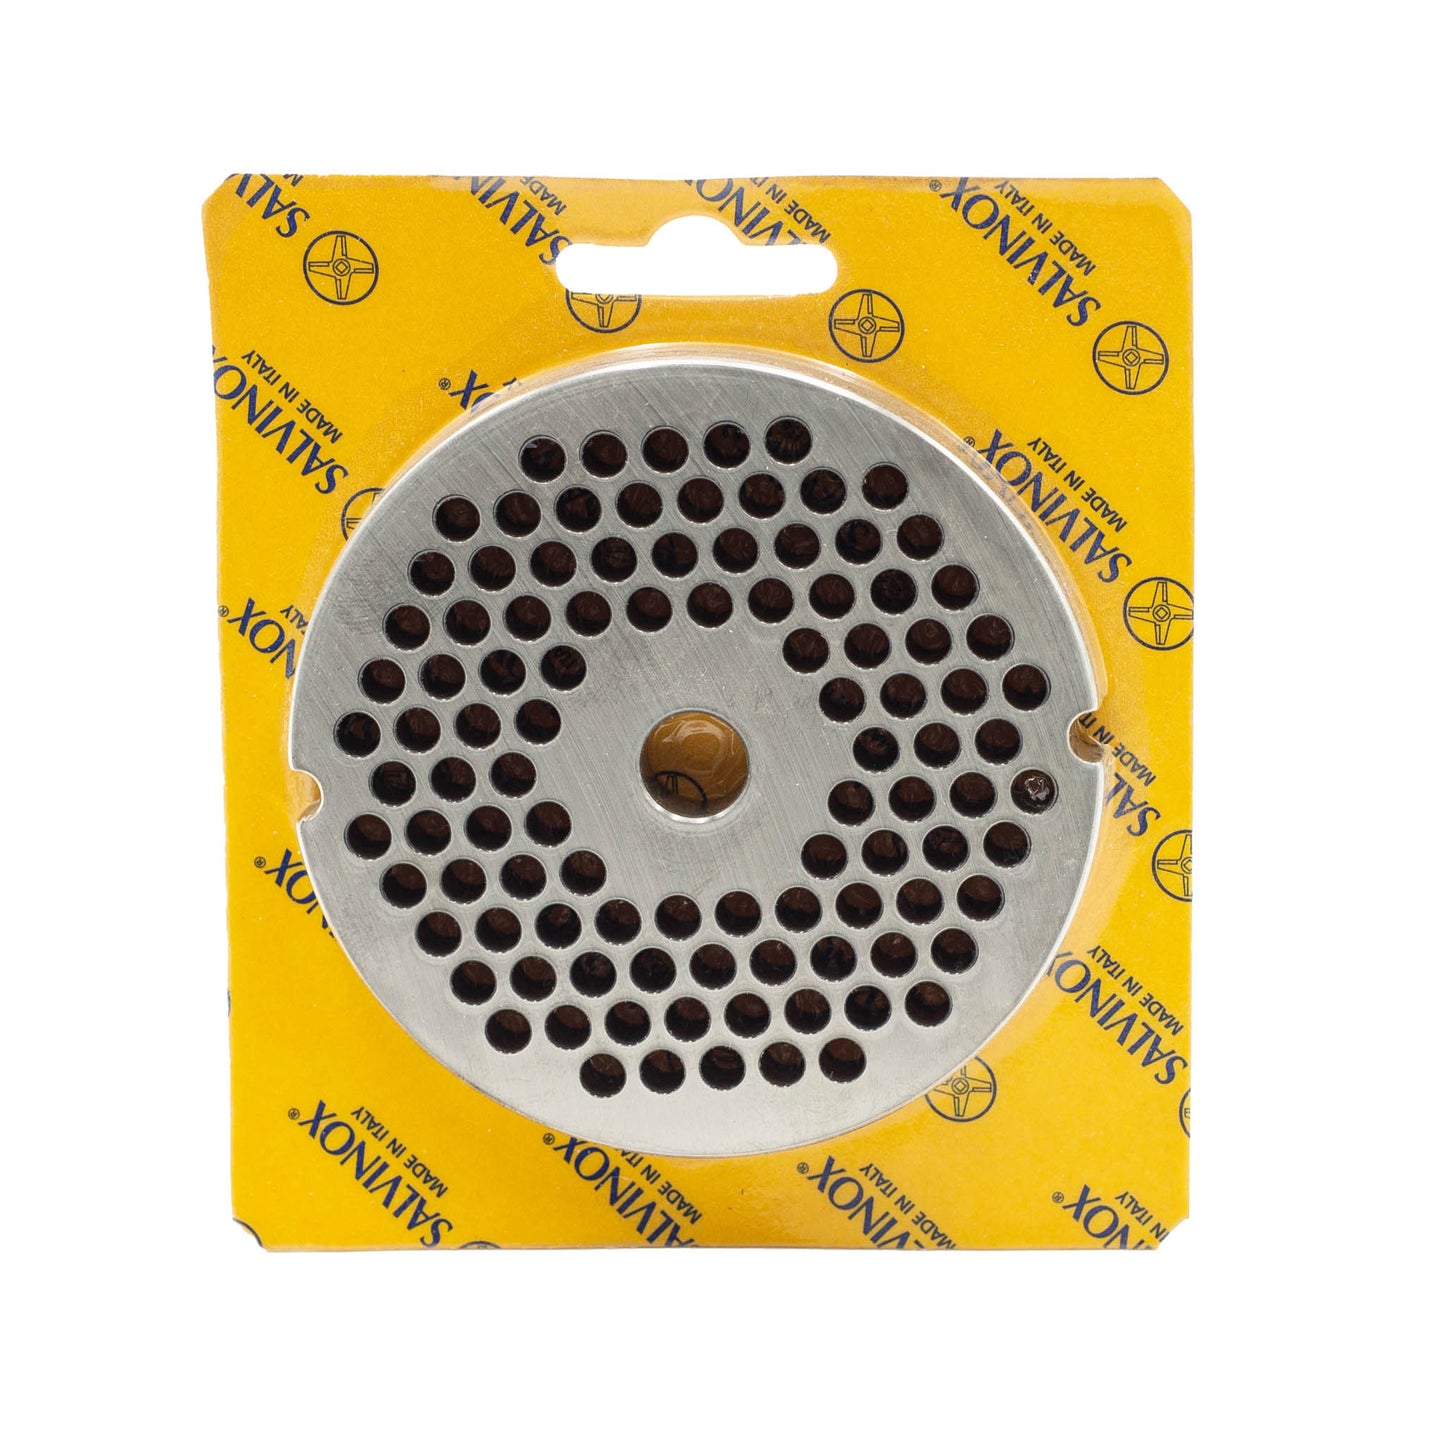 Size 32 with 6mm holes stainless steel replacement mincer plate for salami and sausage mincing machines. 